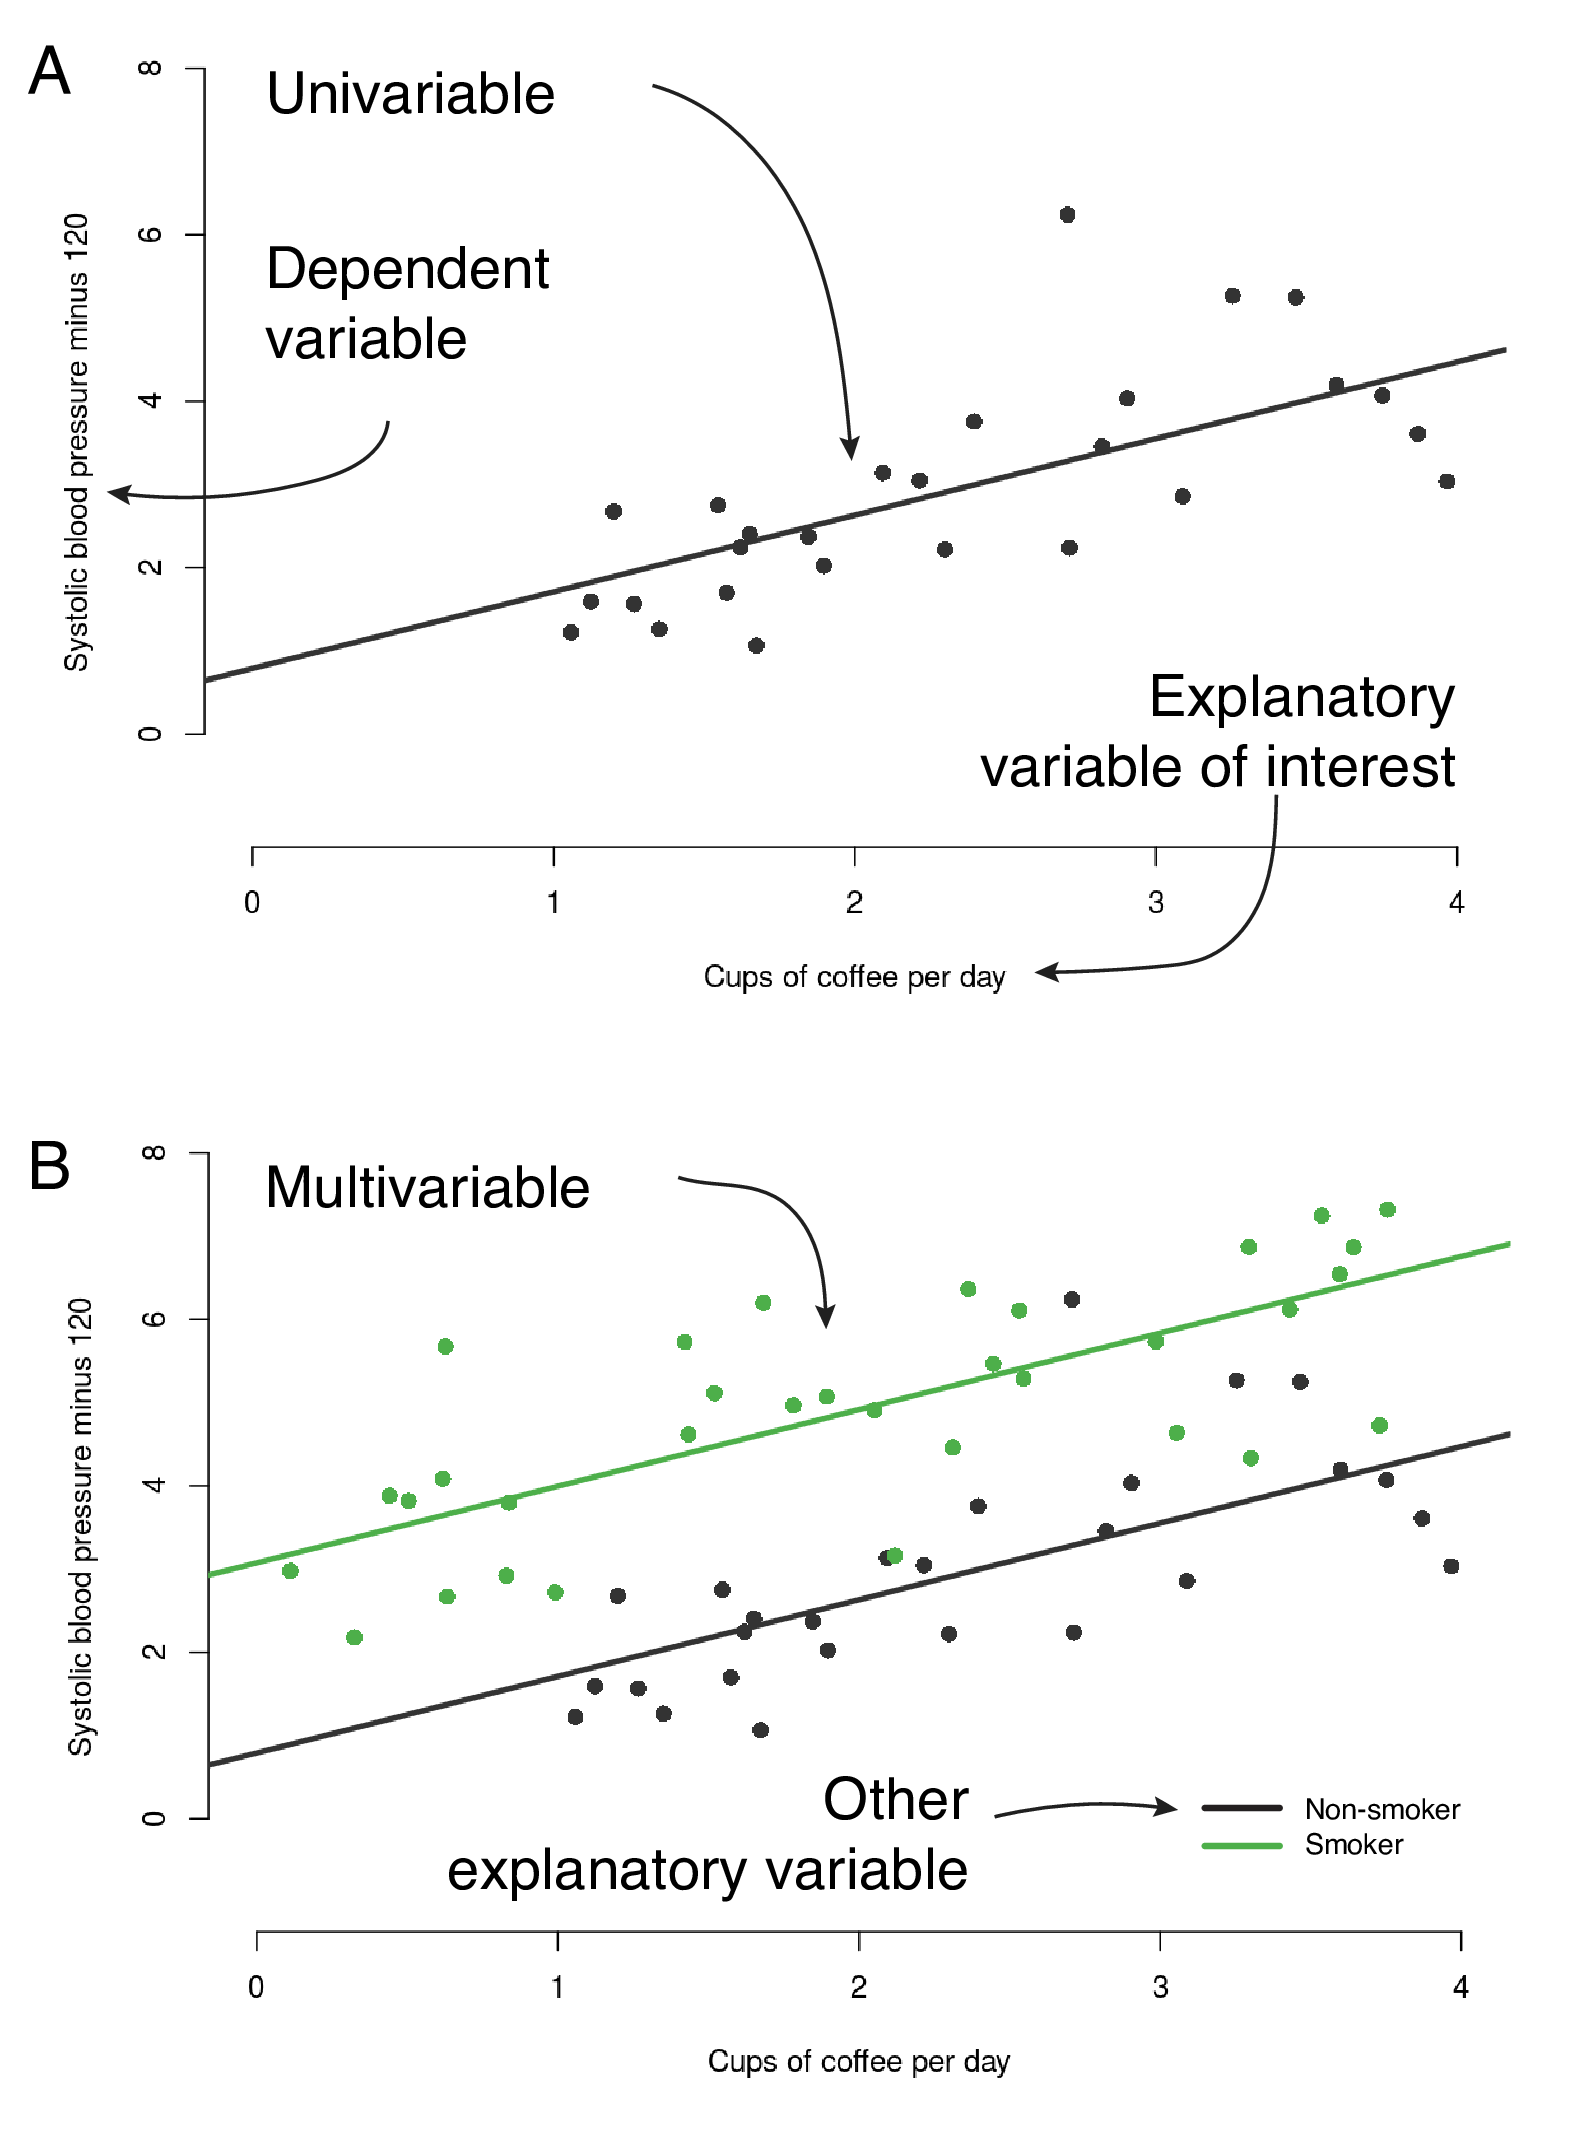 The anatomy of a regression plot. A - univariable linear regression, B - multivariable linear regression.